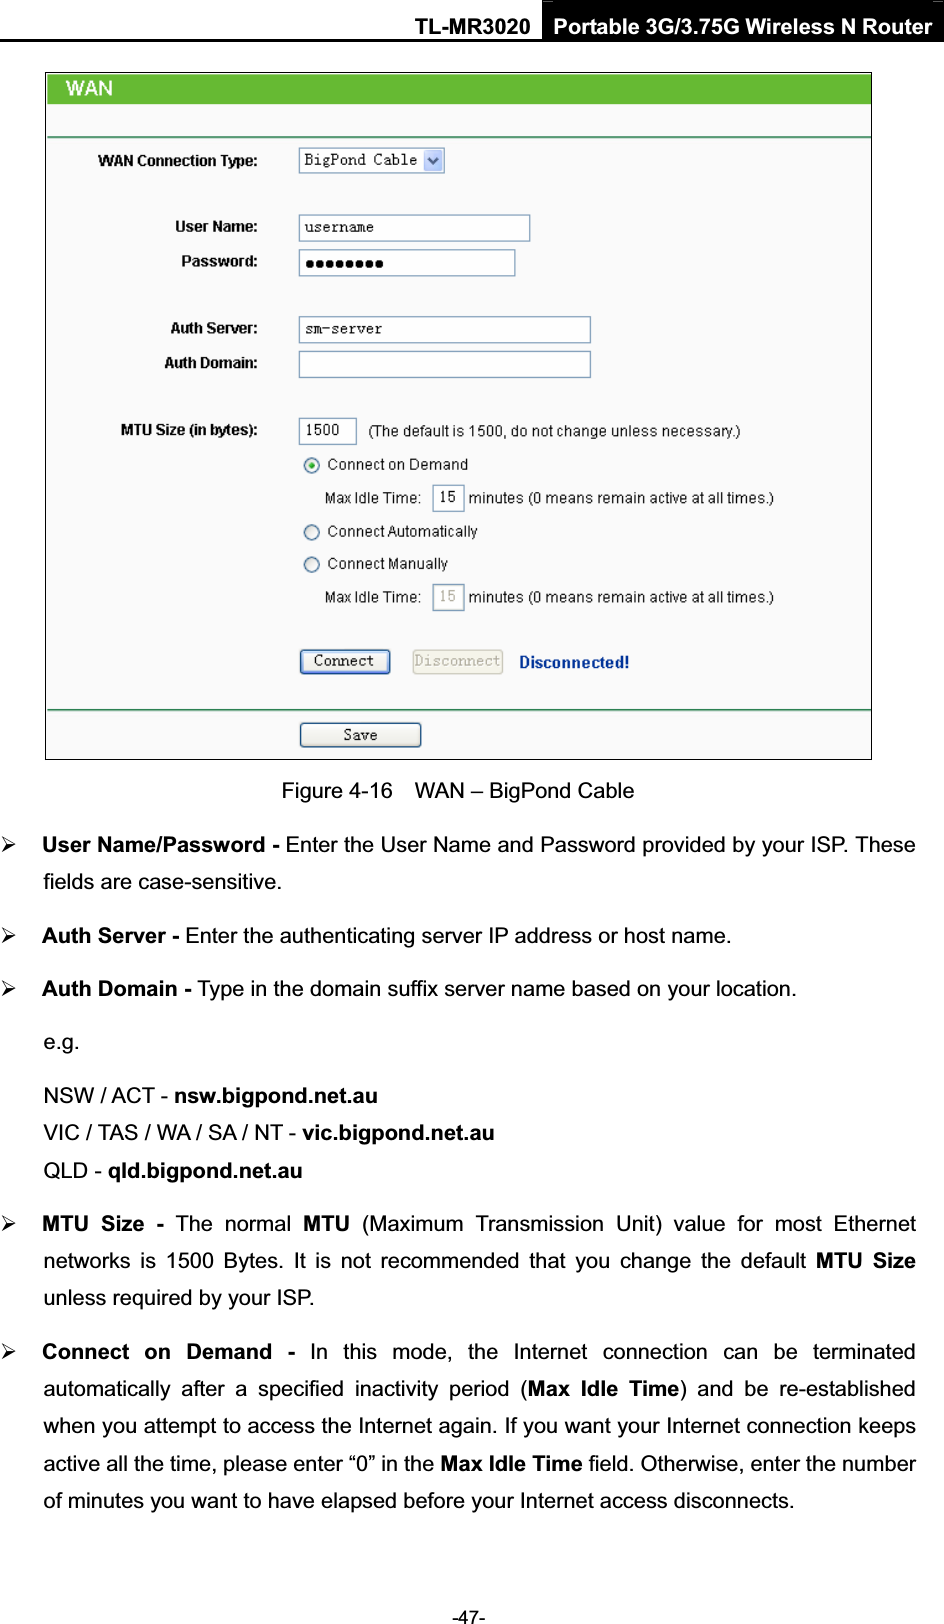 TL-MR3020 Portable 3G/3.75G Wireless N Router-47-Figure 4-16    WAN – BigPond Cable ¾User Name/Password - Enter the User Name and Password provided by your ISP. These fields are case-sensitive. ¾Auth Server - Enter the authenticating server IP address or host name. ¾Auth Domain - Type in the domain suffix server name based on your location. e.g.NSW / ACT - nsw.bigpond.net.auVIC / TAS / WA / SA / NT - vic.bigpond.net.auQLD - qld.bigpond.net.au¾MTU  Size  -  The  normal  MTU  (Maximum  Transmission  Unit)  value  for  most  Ethernet networks  is  1500  Bytes.  It  is  not  recommended  that  you  change  the  default  MTU  Sizeunless required by your ISP. ¾Connect  on  Demand  -  In  this  mode,  the  Internet  connection  can  be  terminated automatically  after  a  specified  inactivity  period  (Max  Idle  Time)  and be re-established when you attempt to access the Internet again. If you want your Internet connection keeps active all the time, please enter “0” in the Max Idle Time field. Otherwise, enter the number of minutes you want to have elapsed before your Internet access disconnects. 